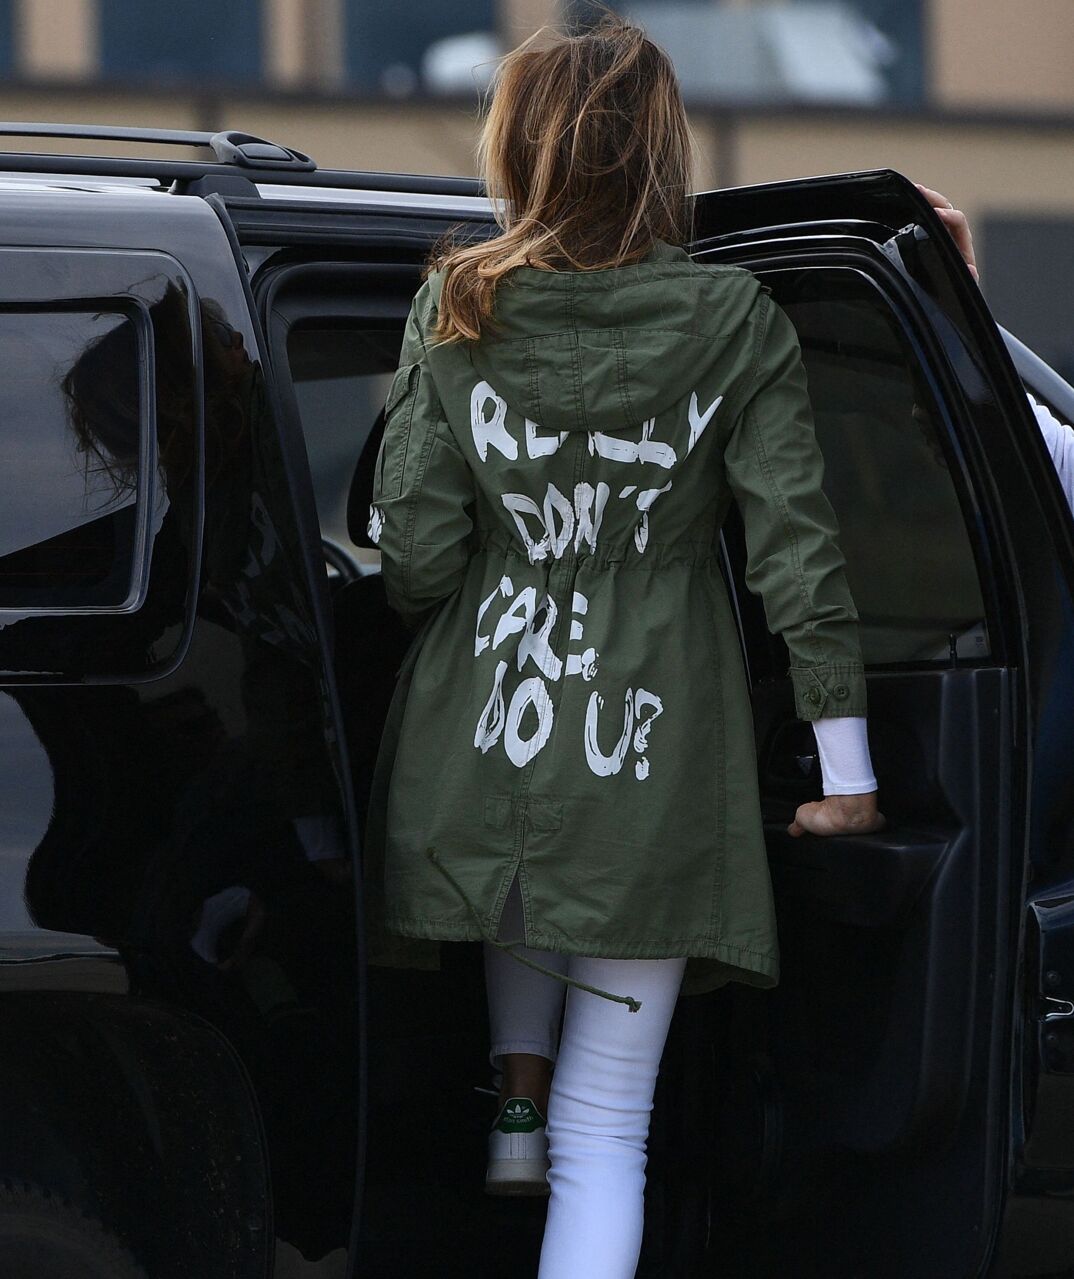 Melania Trump in her I really don't care jacket